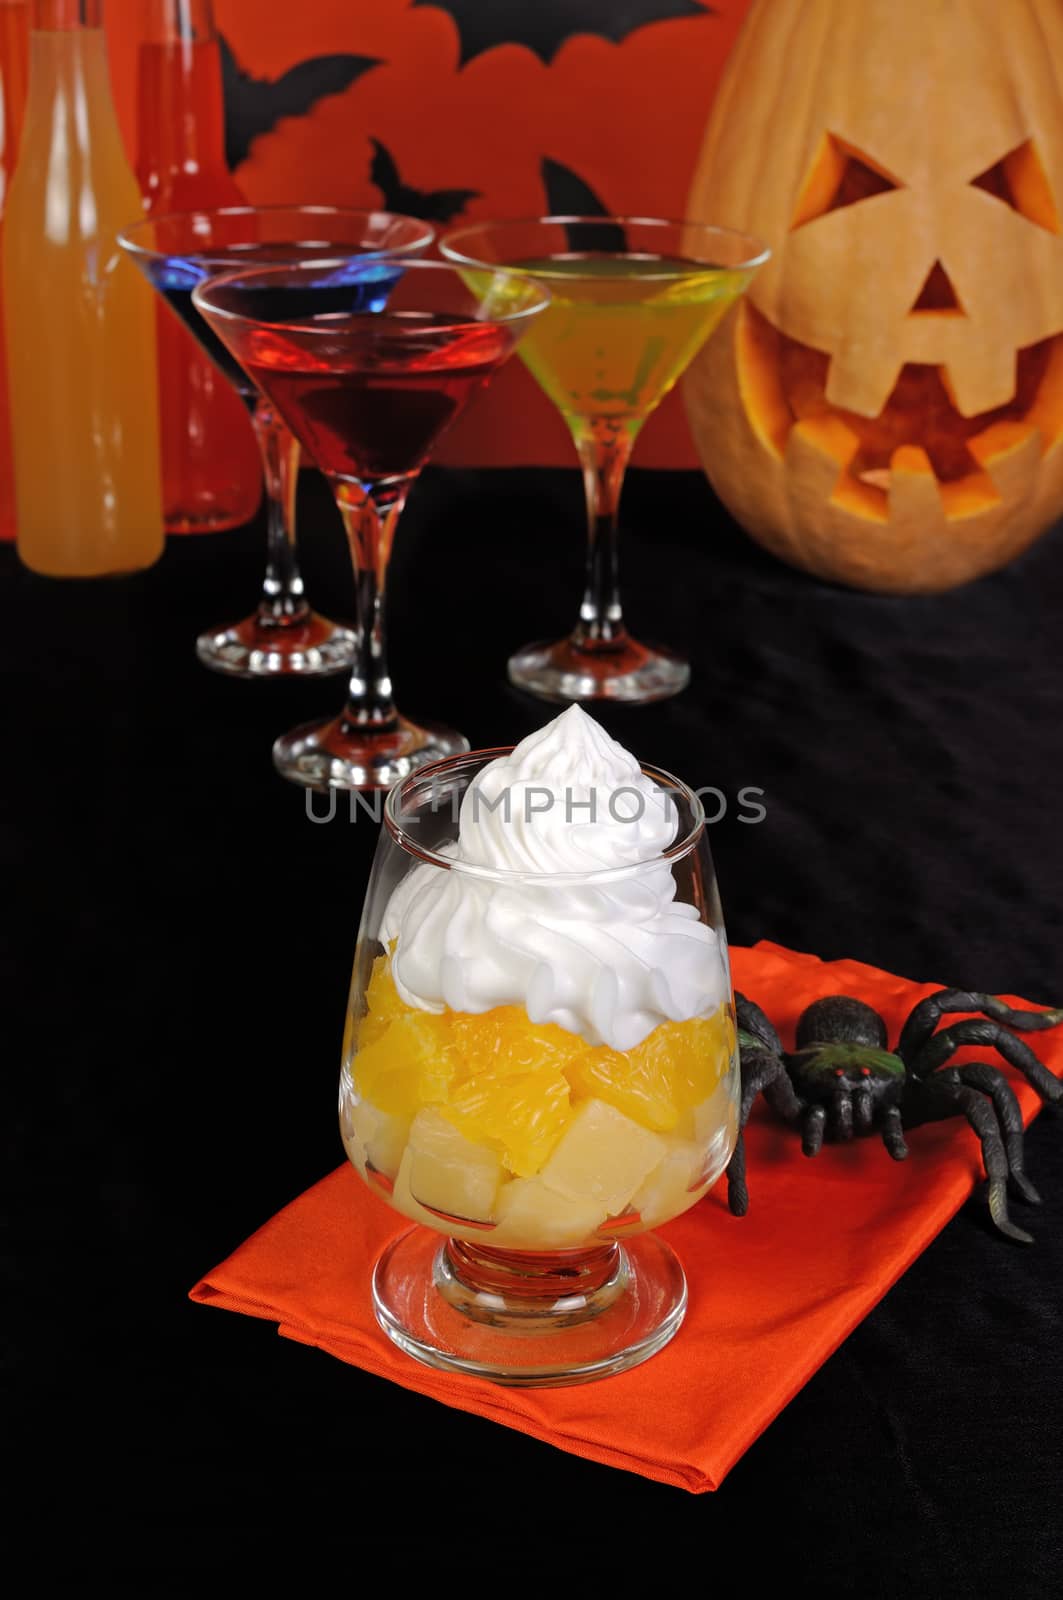 Dessert with slices of pineapple and orange whipped cream